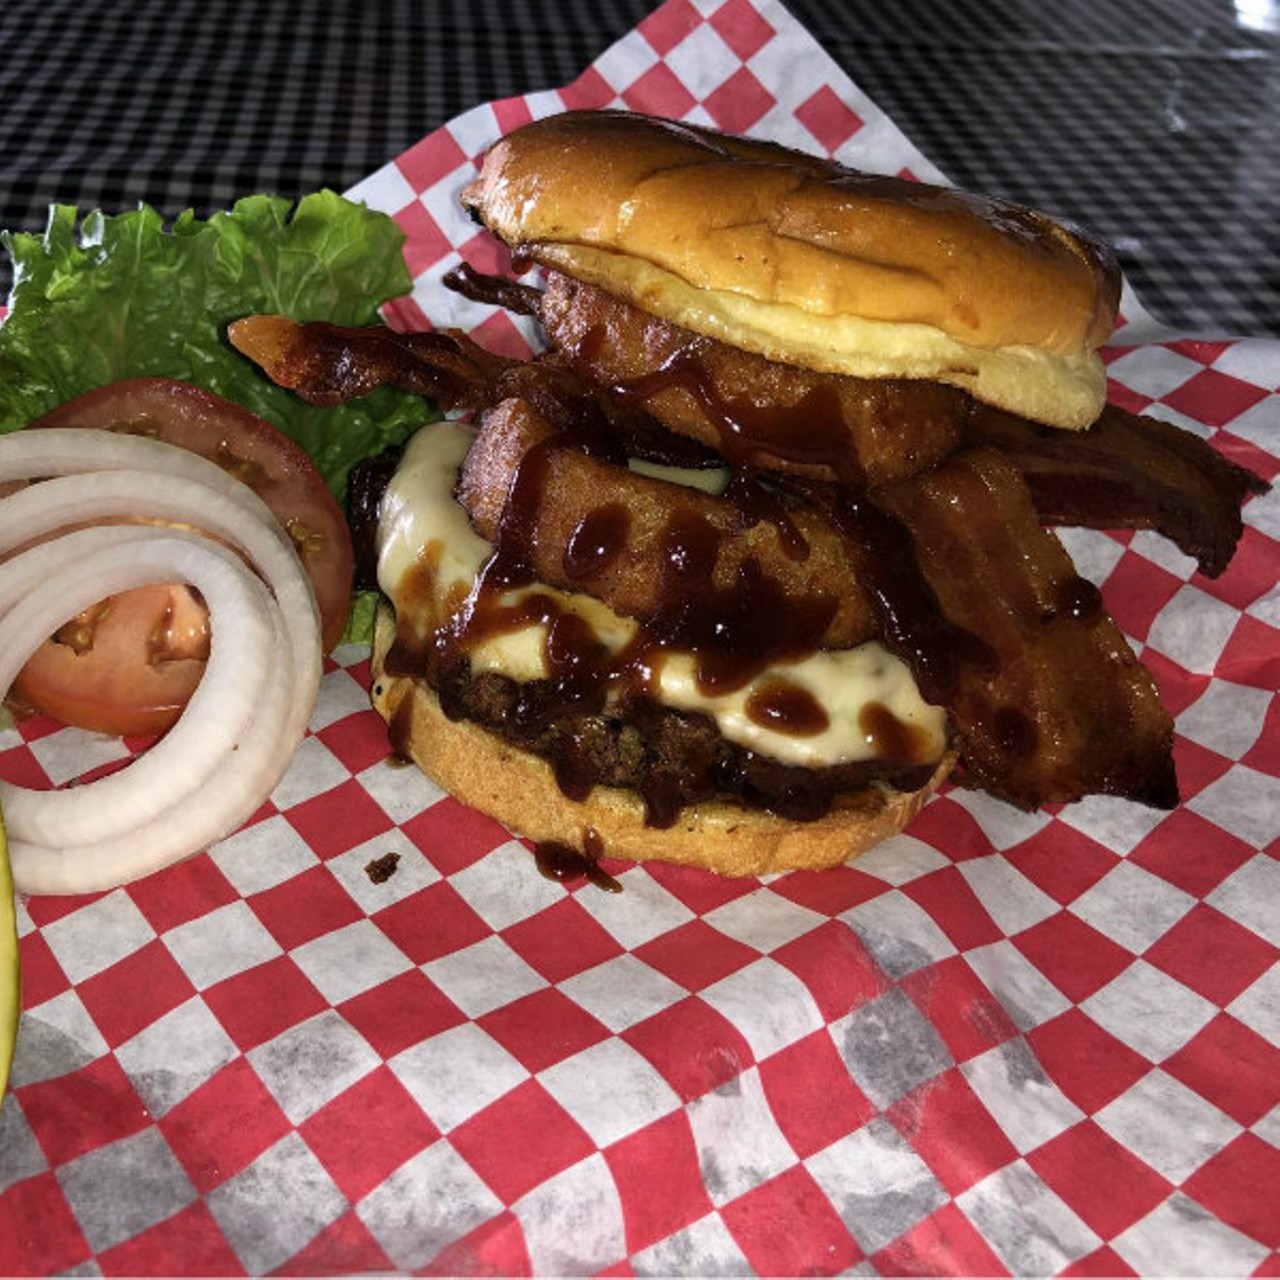 Sharpshooter Pit & Grill
(8135 Gravois Road; 314-353-4745)
The Cowboy - Our half pound burger topped with our signature BBQ sauce, pepper cheese, onion rings, and cherry smoked bacon on a soft, butter toasted bun.